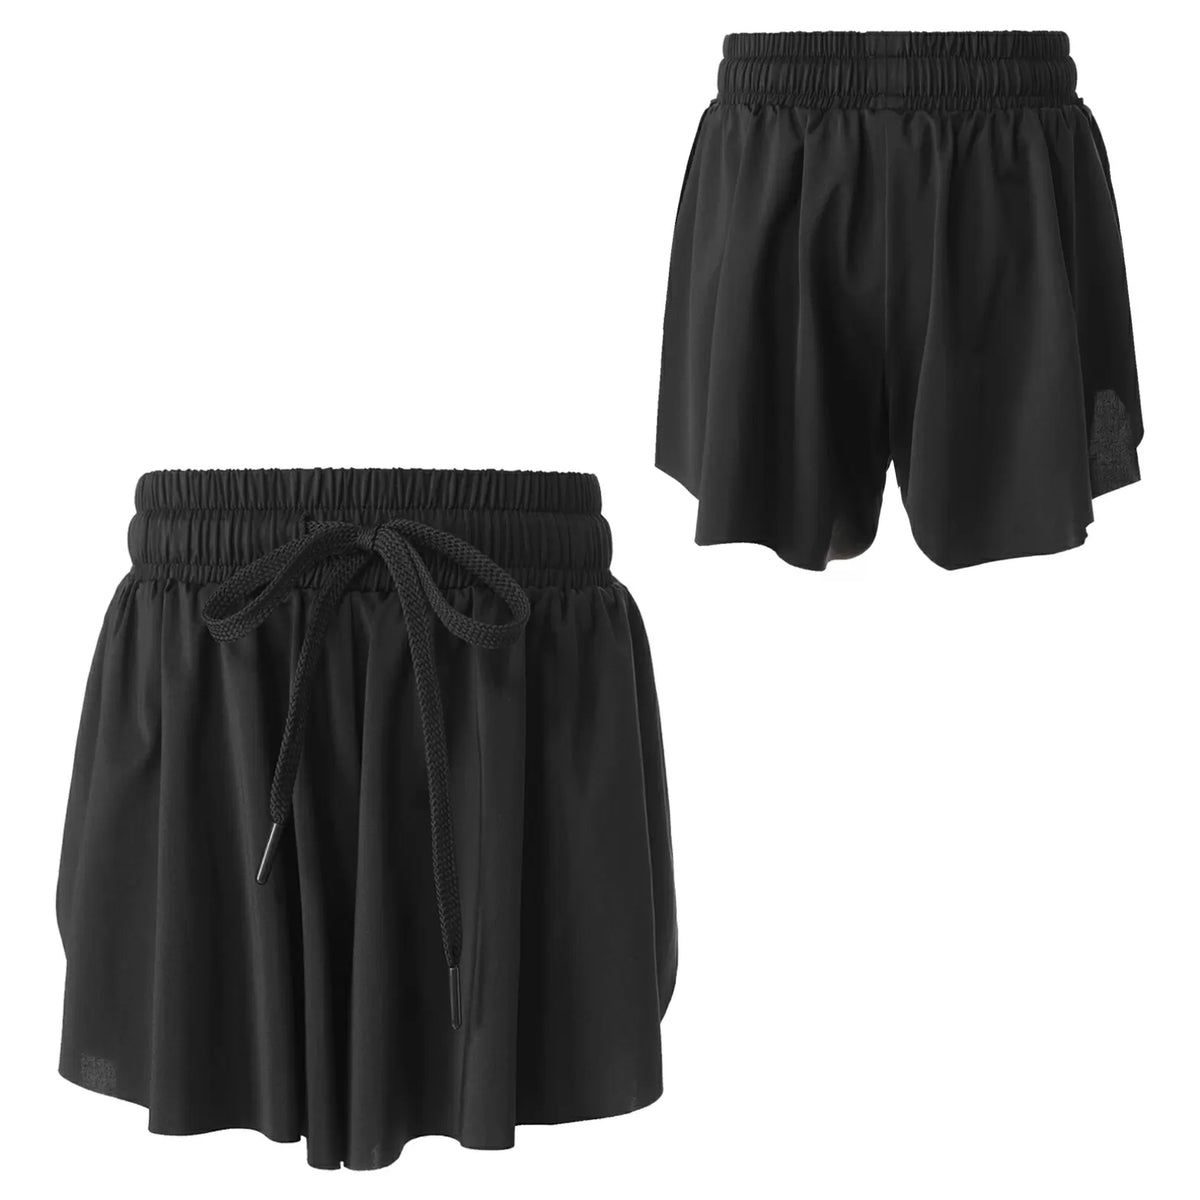 Kids Girls Flowy Shorts Athletic Running Butterfly Skirts